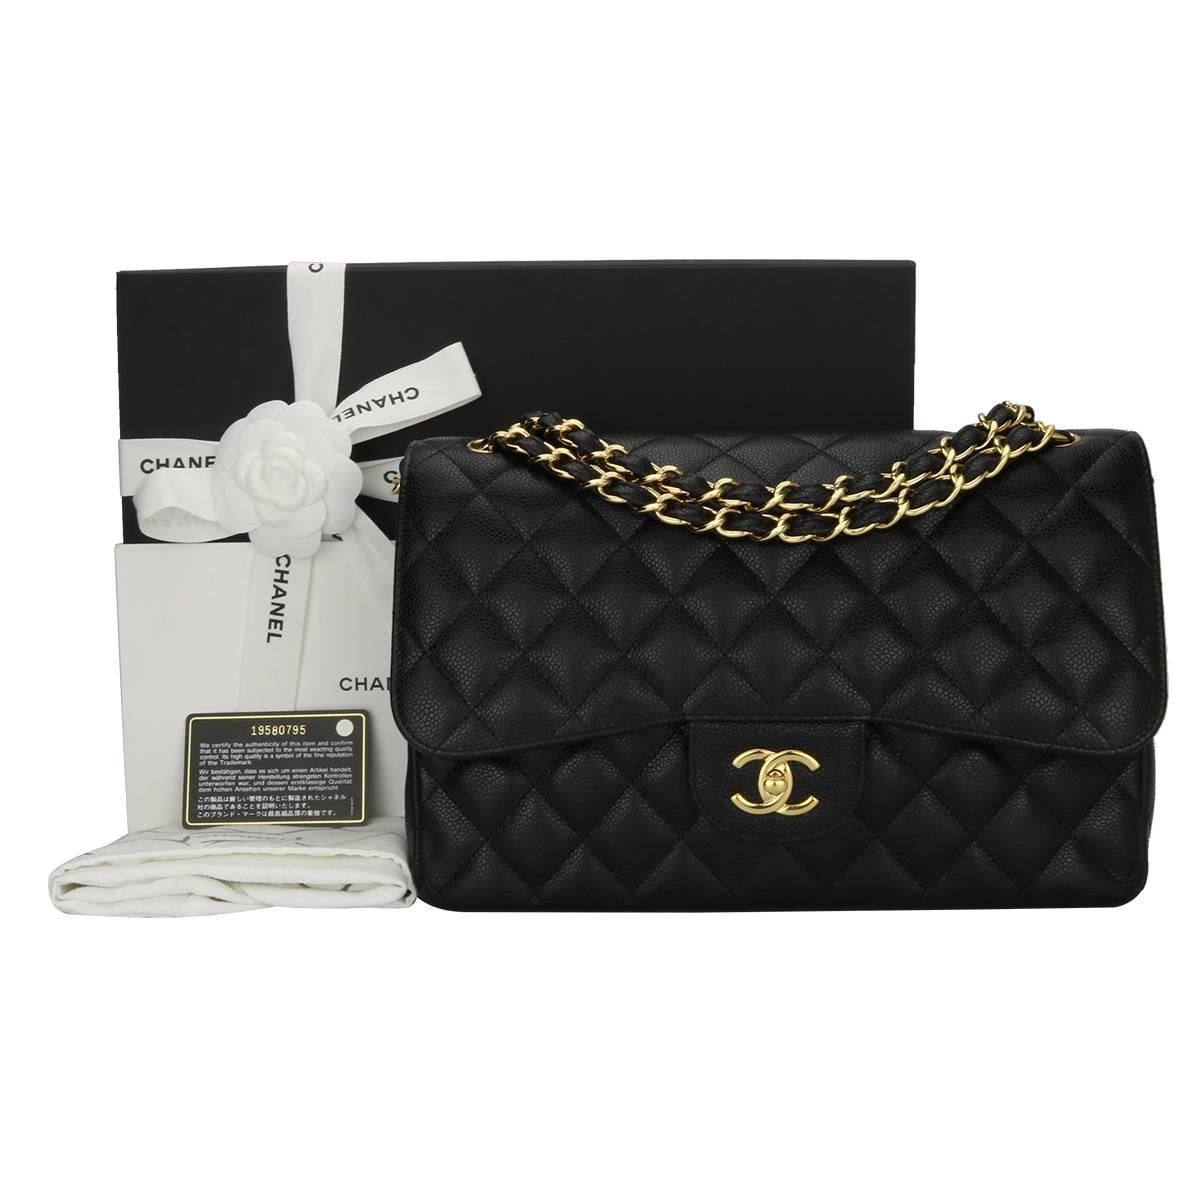 Authentic CHANEL Classic Jumbo Double Flap Black Caviar with Gold Hardware 2014.

This stunning bag is in a pristine condition, the bag still holds its original shape, and the hardware is still very shiny. Leather smells fresh as if new.

Exterior